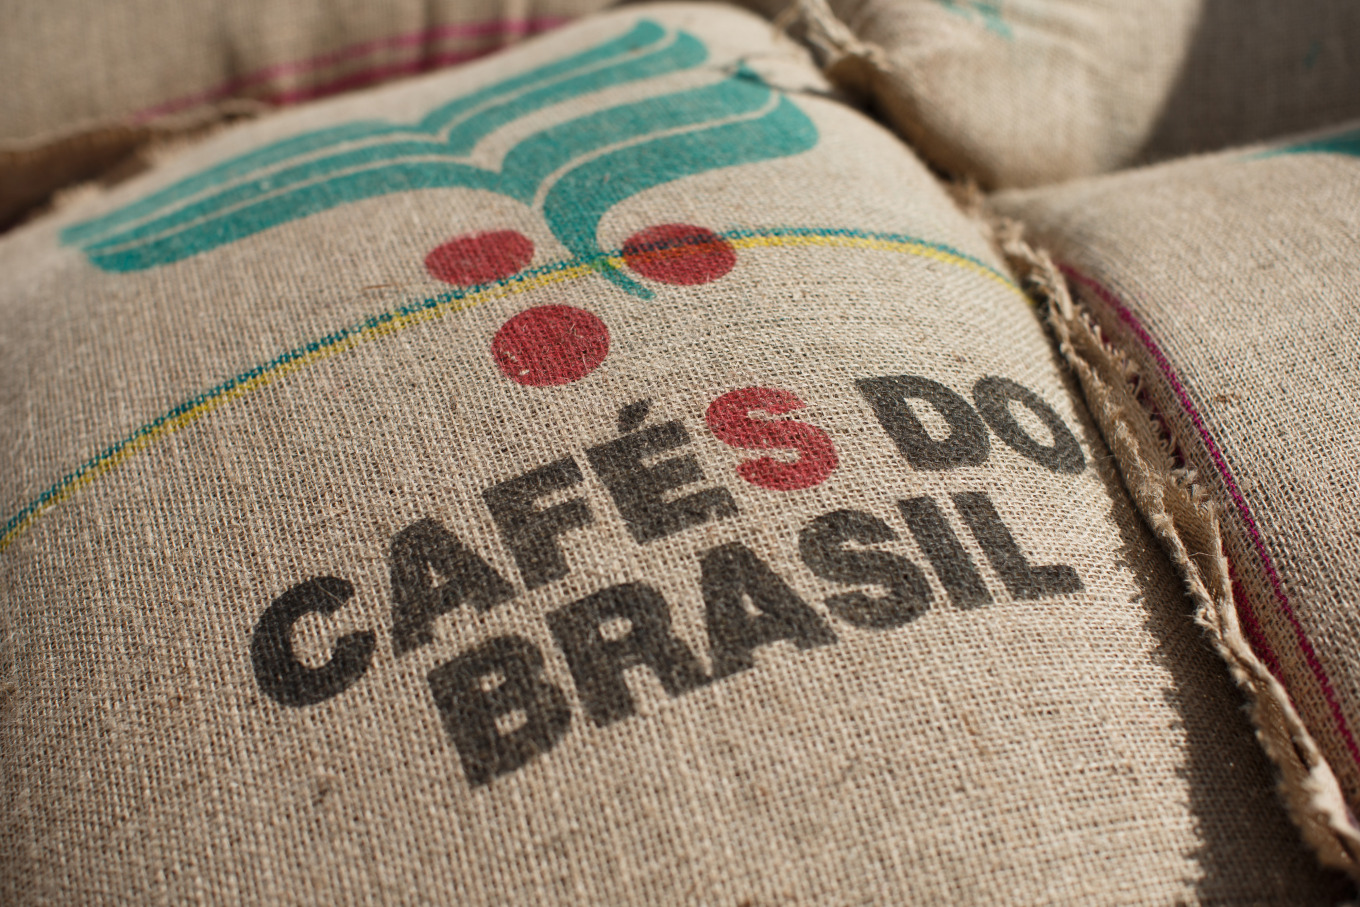 Top Grower Brazil's Coffee Supplies Have Never Been Lower - Bloomberg